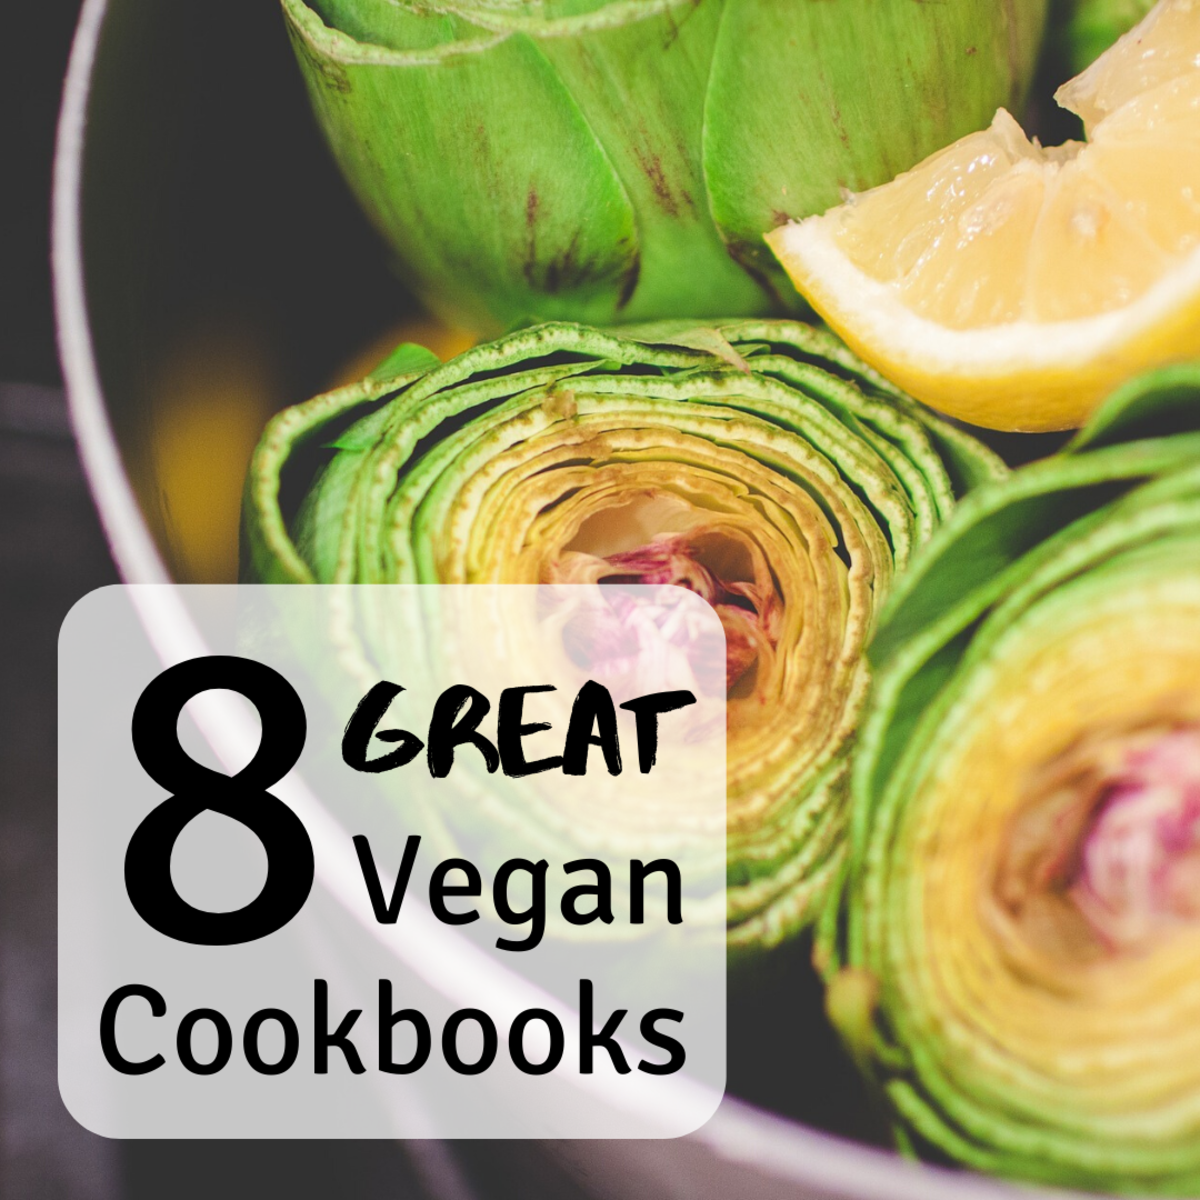 These are my absolute favorite vegan cookbooks.